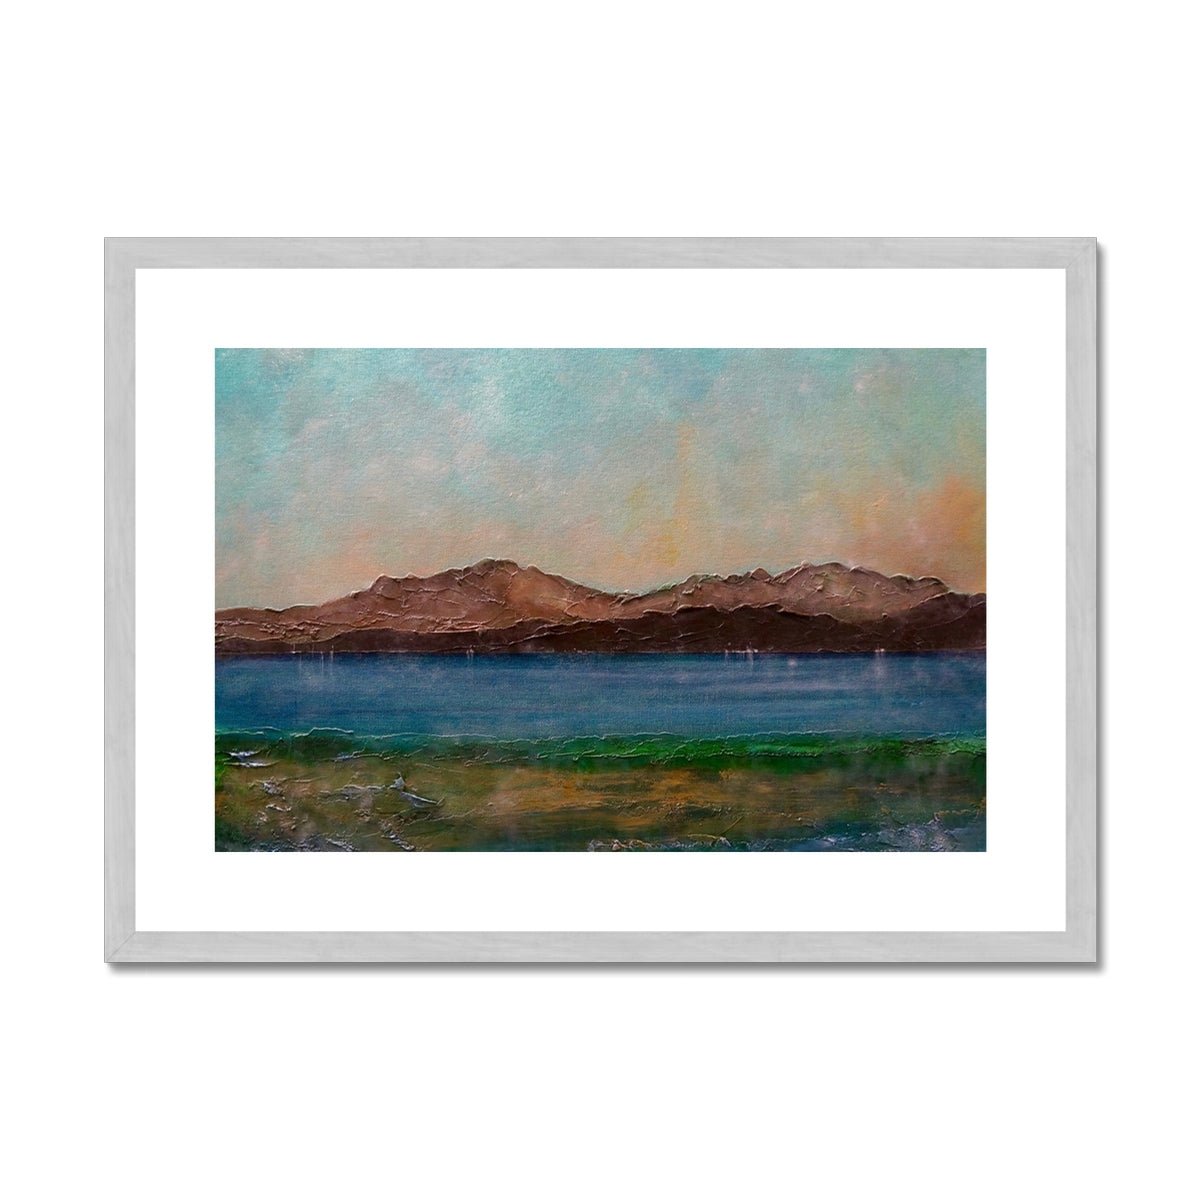 Arran From Scalpsie Bay Painting | Antique Framed & Mounted Prints From Scotland-Antique Framed & Mounted Prints-Arran Art Gallery-A2 Landscape-Silver Frame-Paintings, Prints, Homeware, Art Gifts From Scotland By Scottish Artist Kevin Hunter